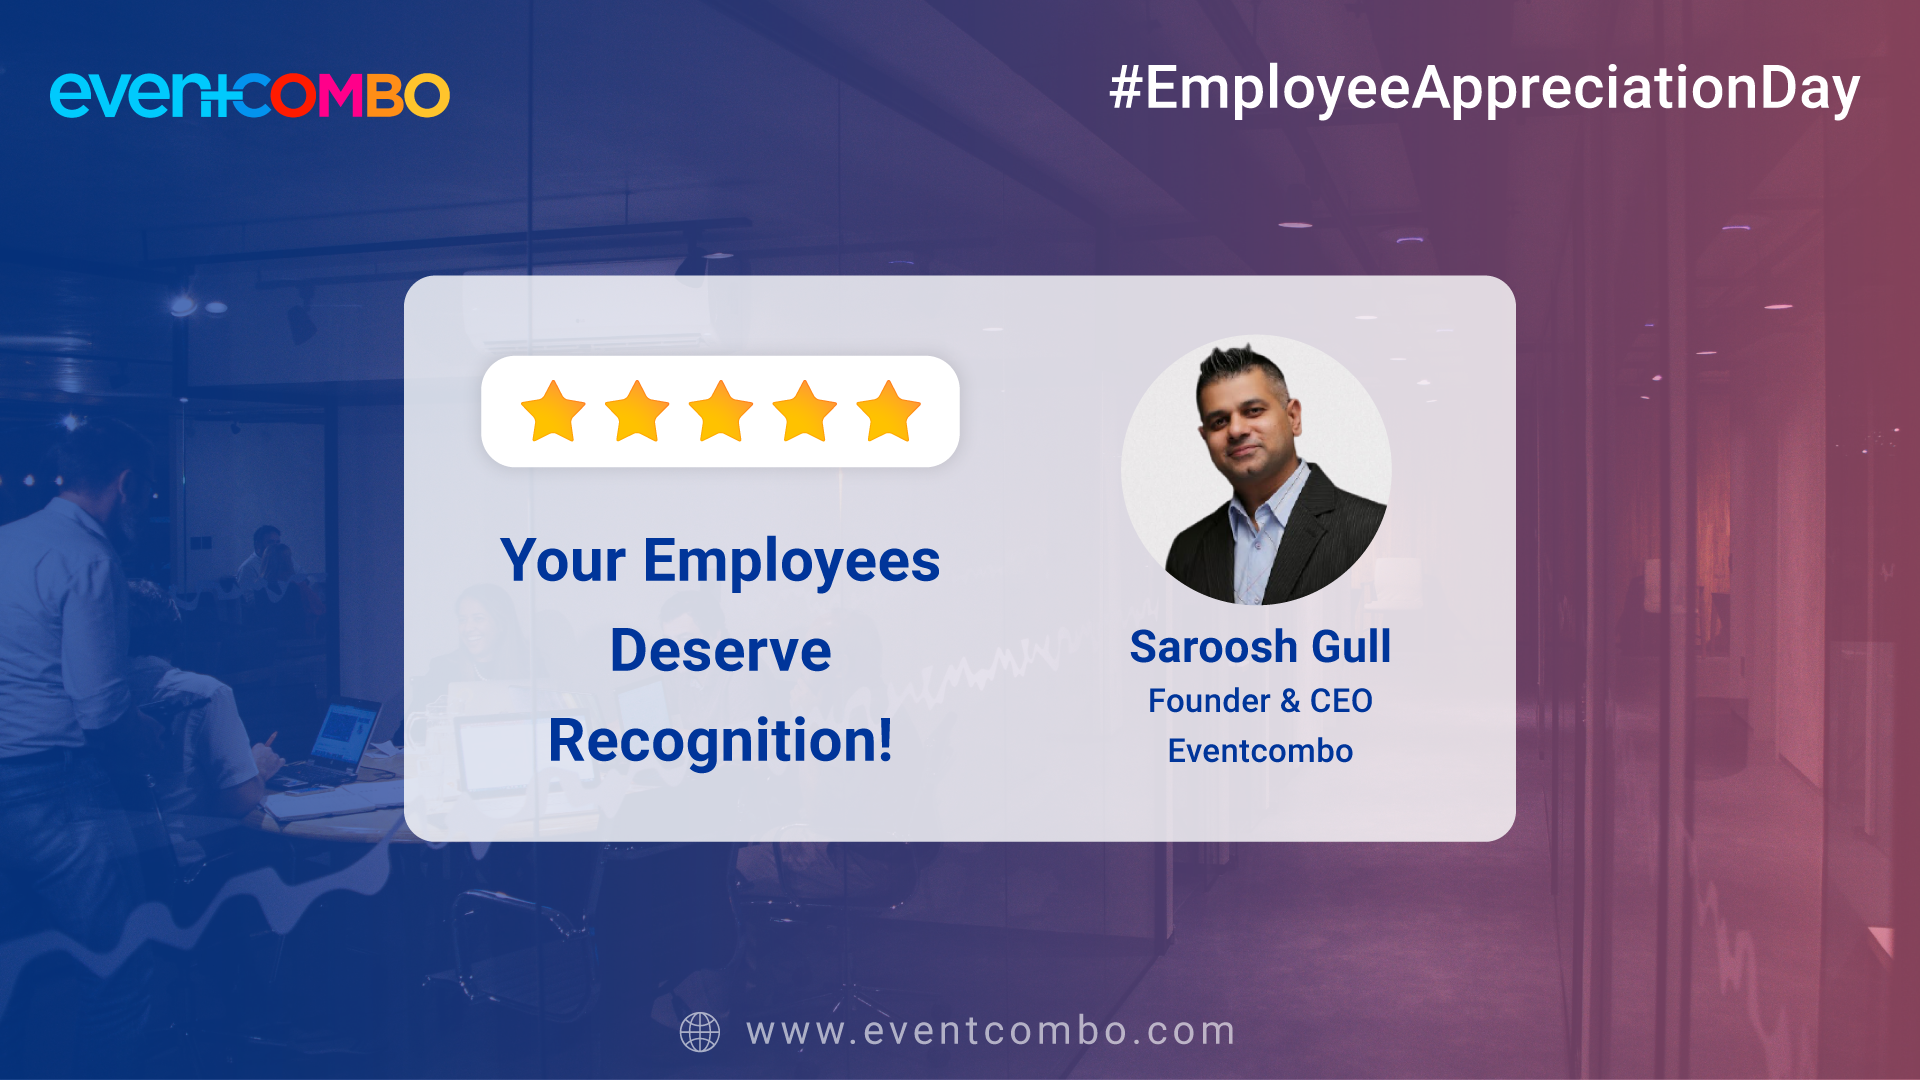 5 Star CEO Saroosh Gull: Your Employees Deserve Recognition!